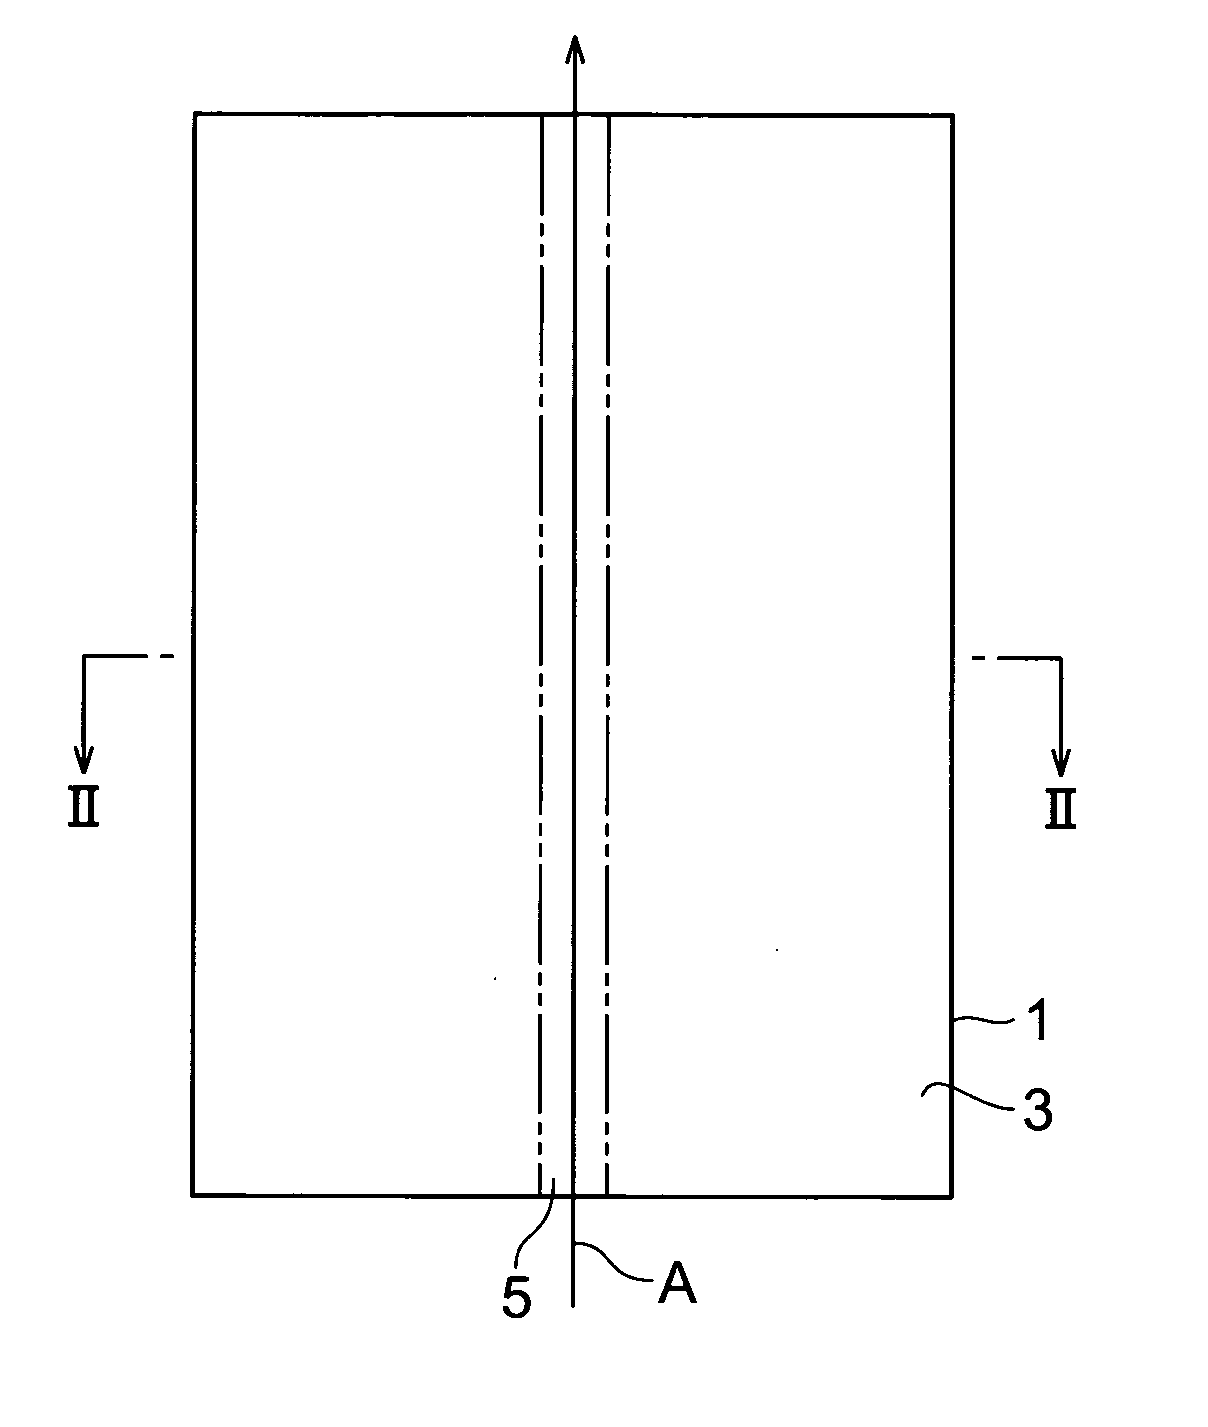 Method of cutting processed object